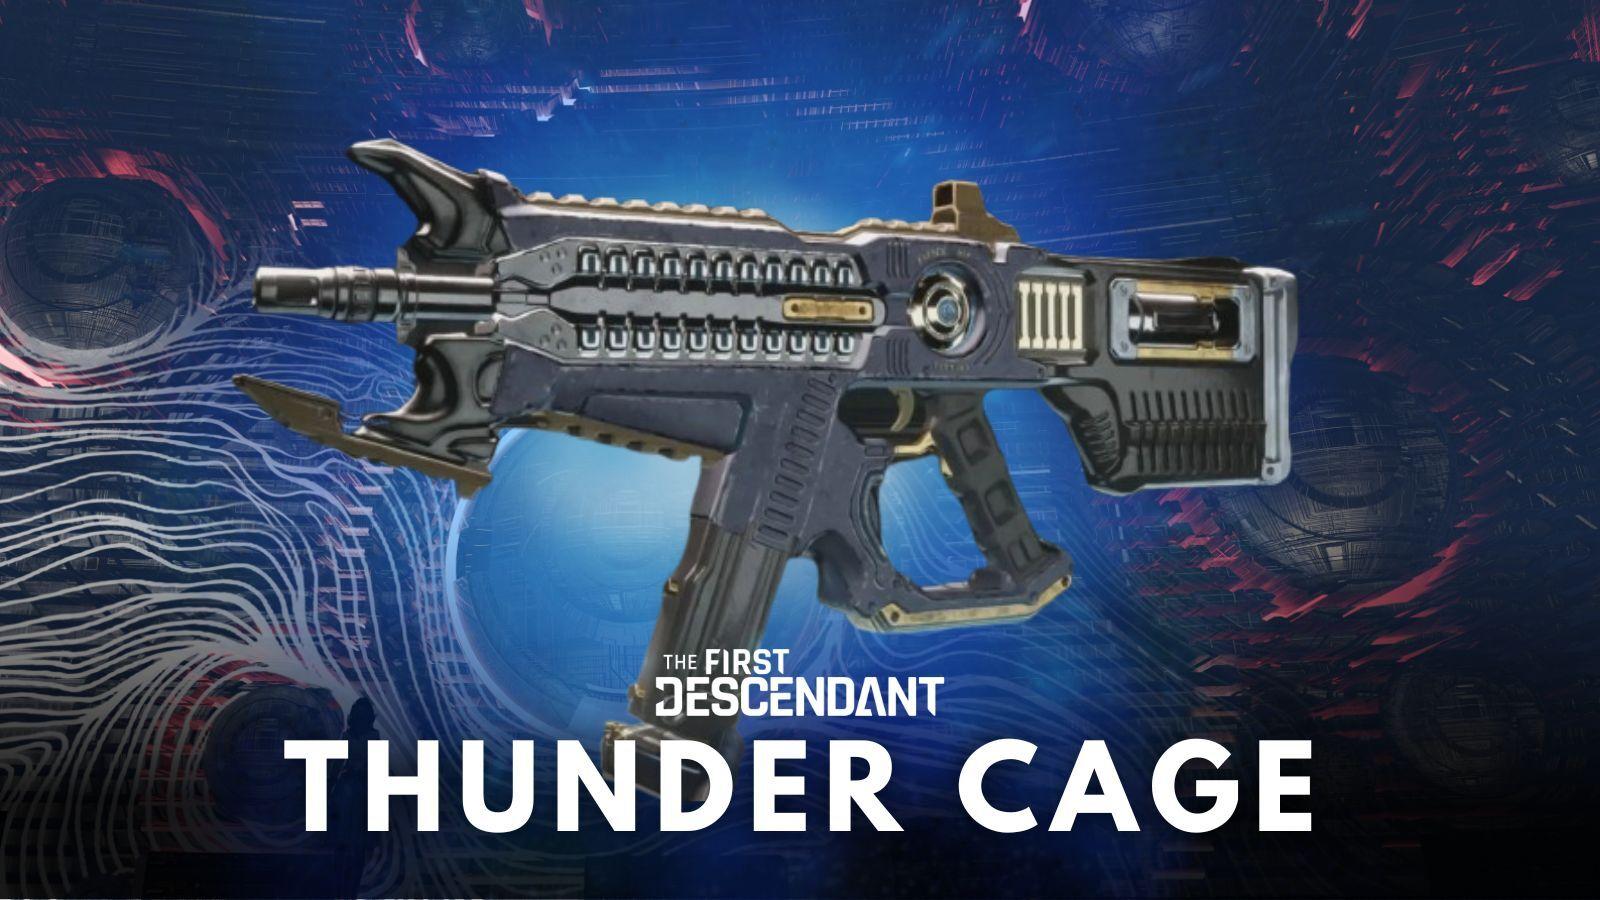 Best Thunder Cage weapon build The First descendant